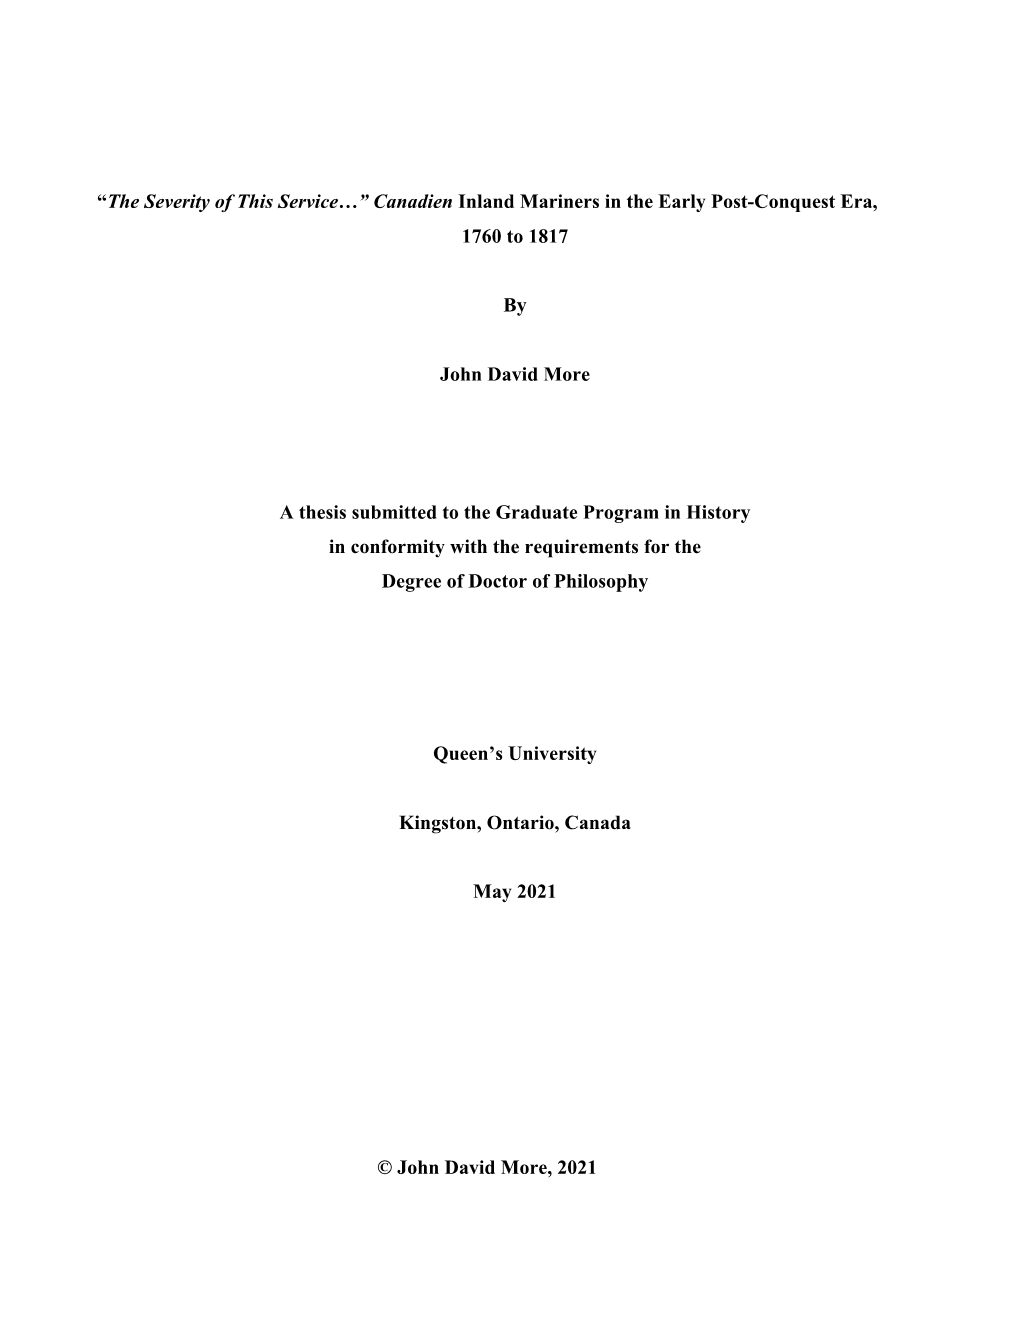 Thesis Document (13.19Mb)